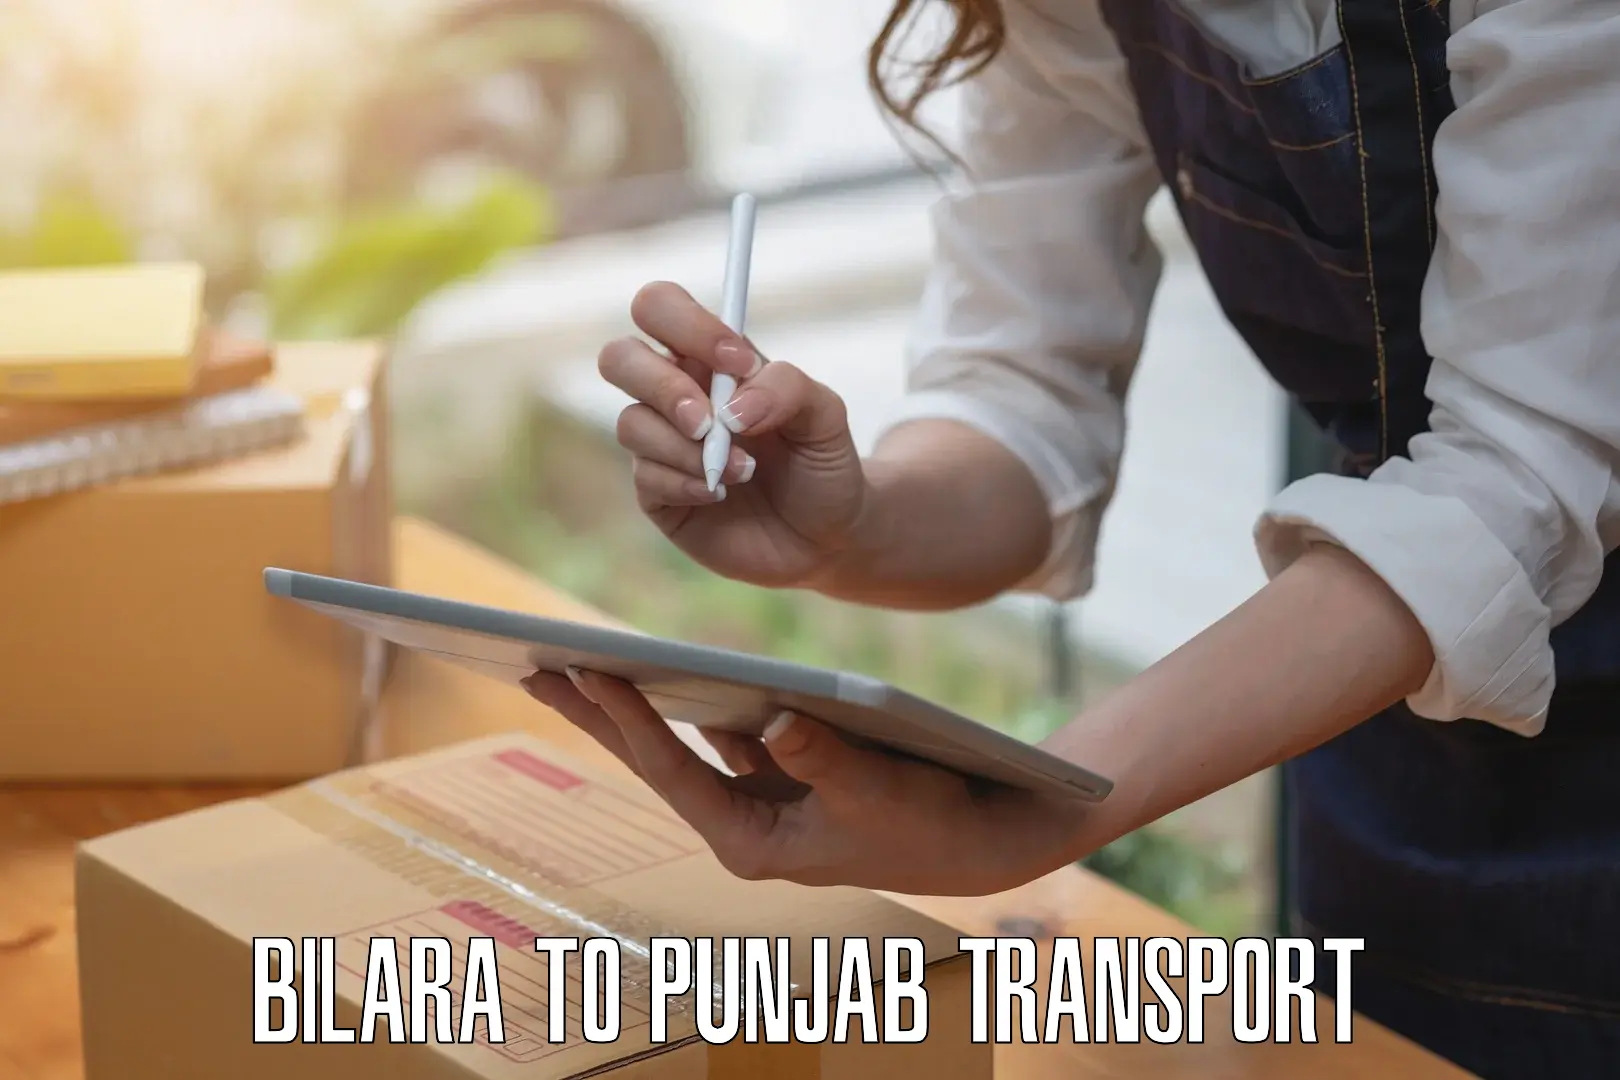 Transport bike from one state to another Bilara to Punjab